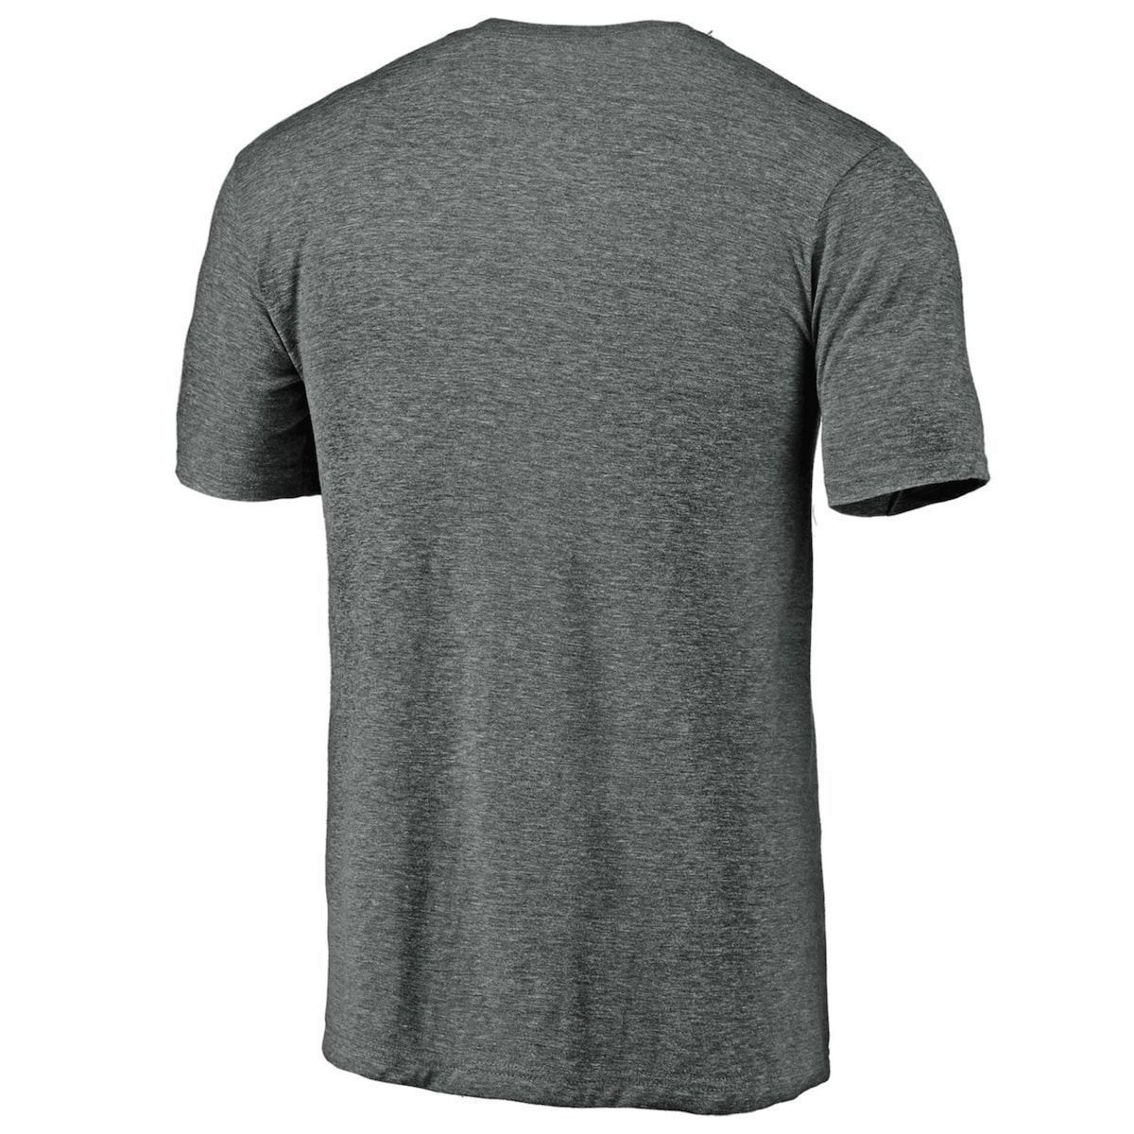 Fanatics Branded Men's Heathered Gray New York Mets Weathered Official Logo Tri-Blend T-Shirt - Image 4 of 4